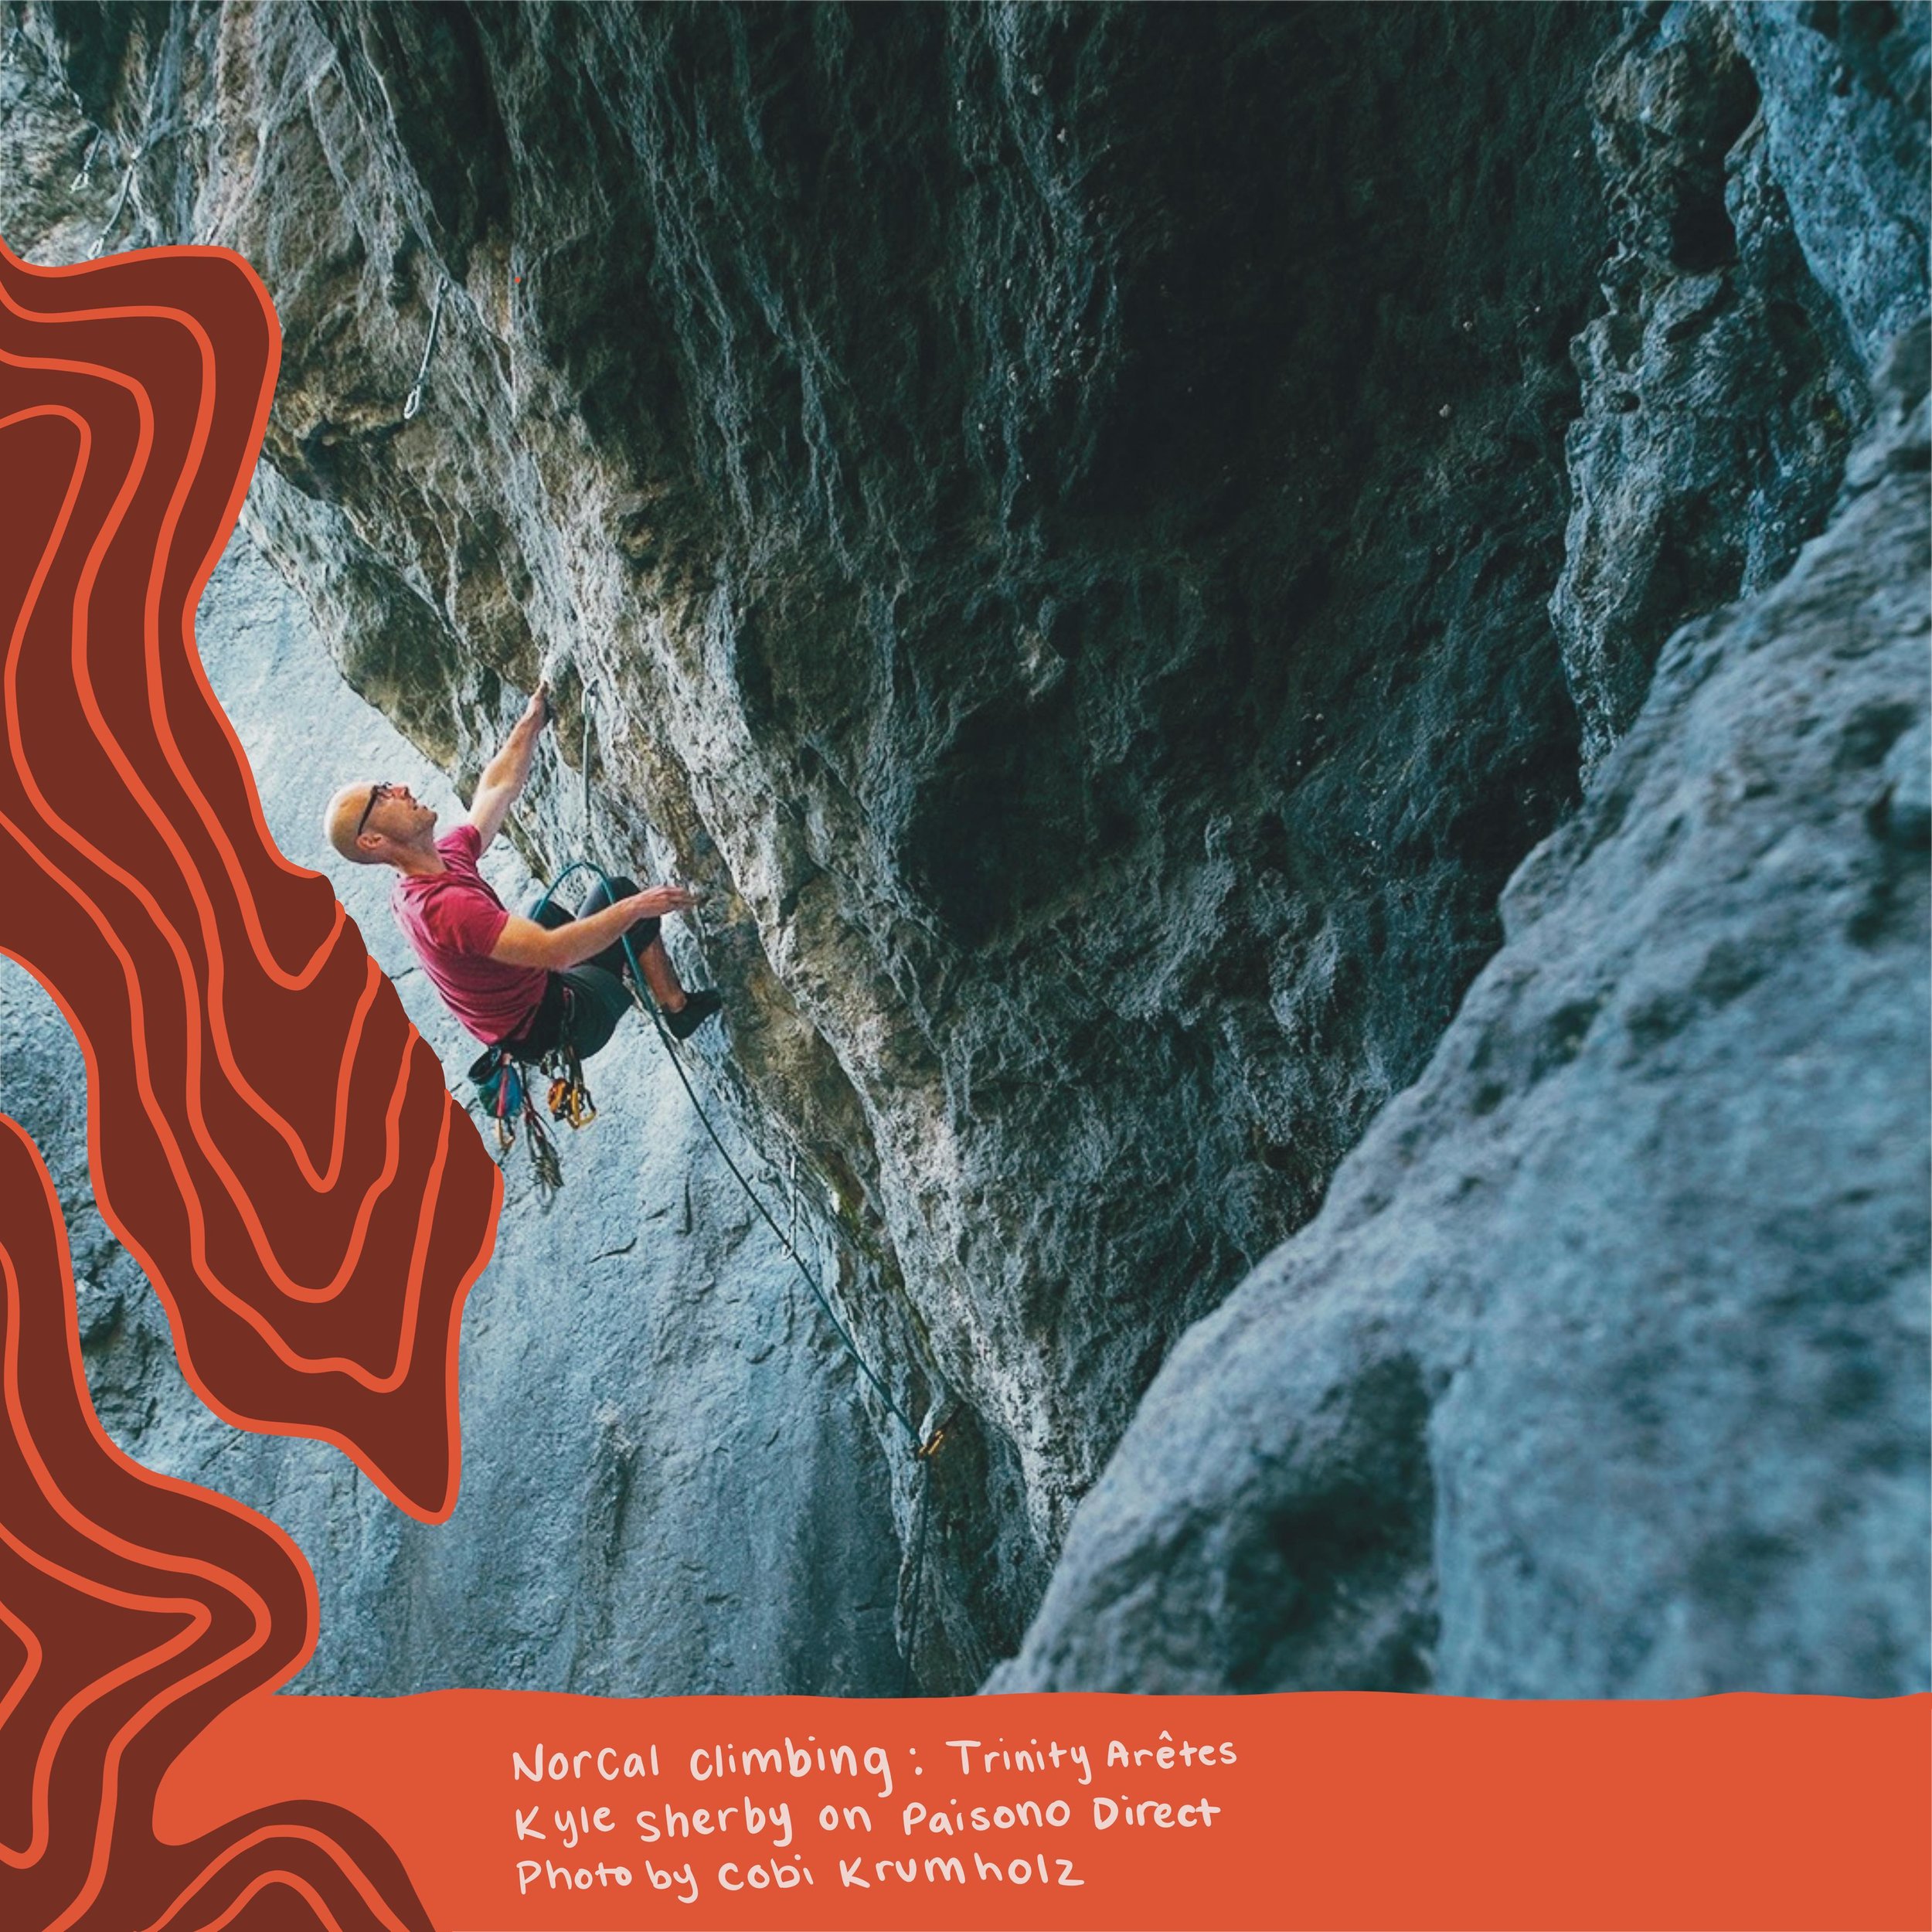 NorCal based? Or looking to plan a climbing trip? You won&rsquo;t want to skip the Trinity Ar&ecirc;tes. This crag has climbs for everyone. Click the link in our bio to read more about this destination in our latest blog post, &ldquo;The Forgotten Co